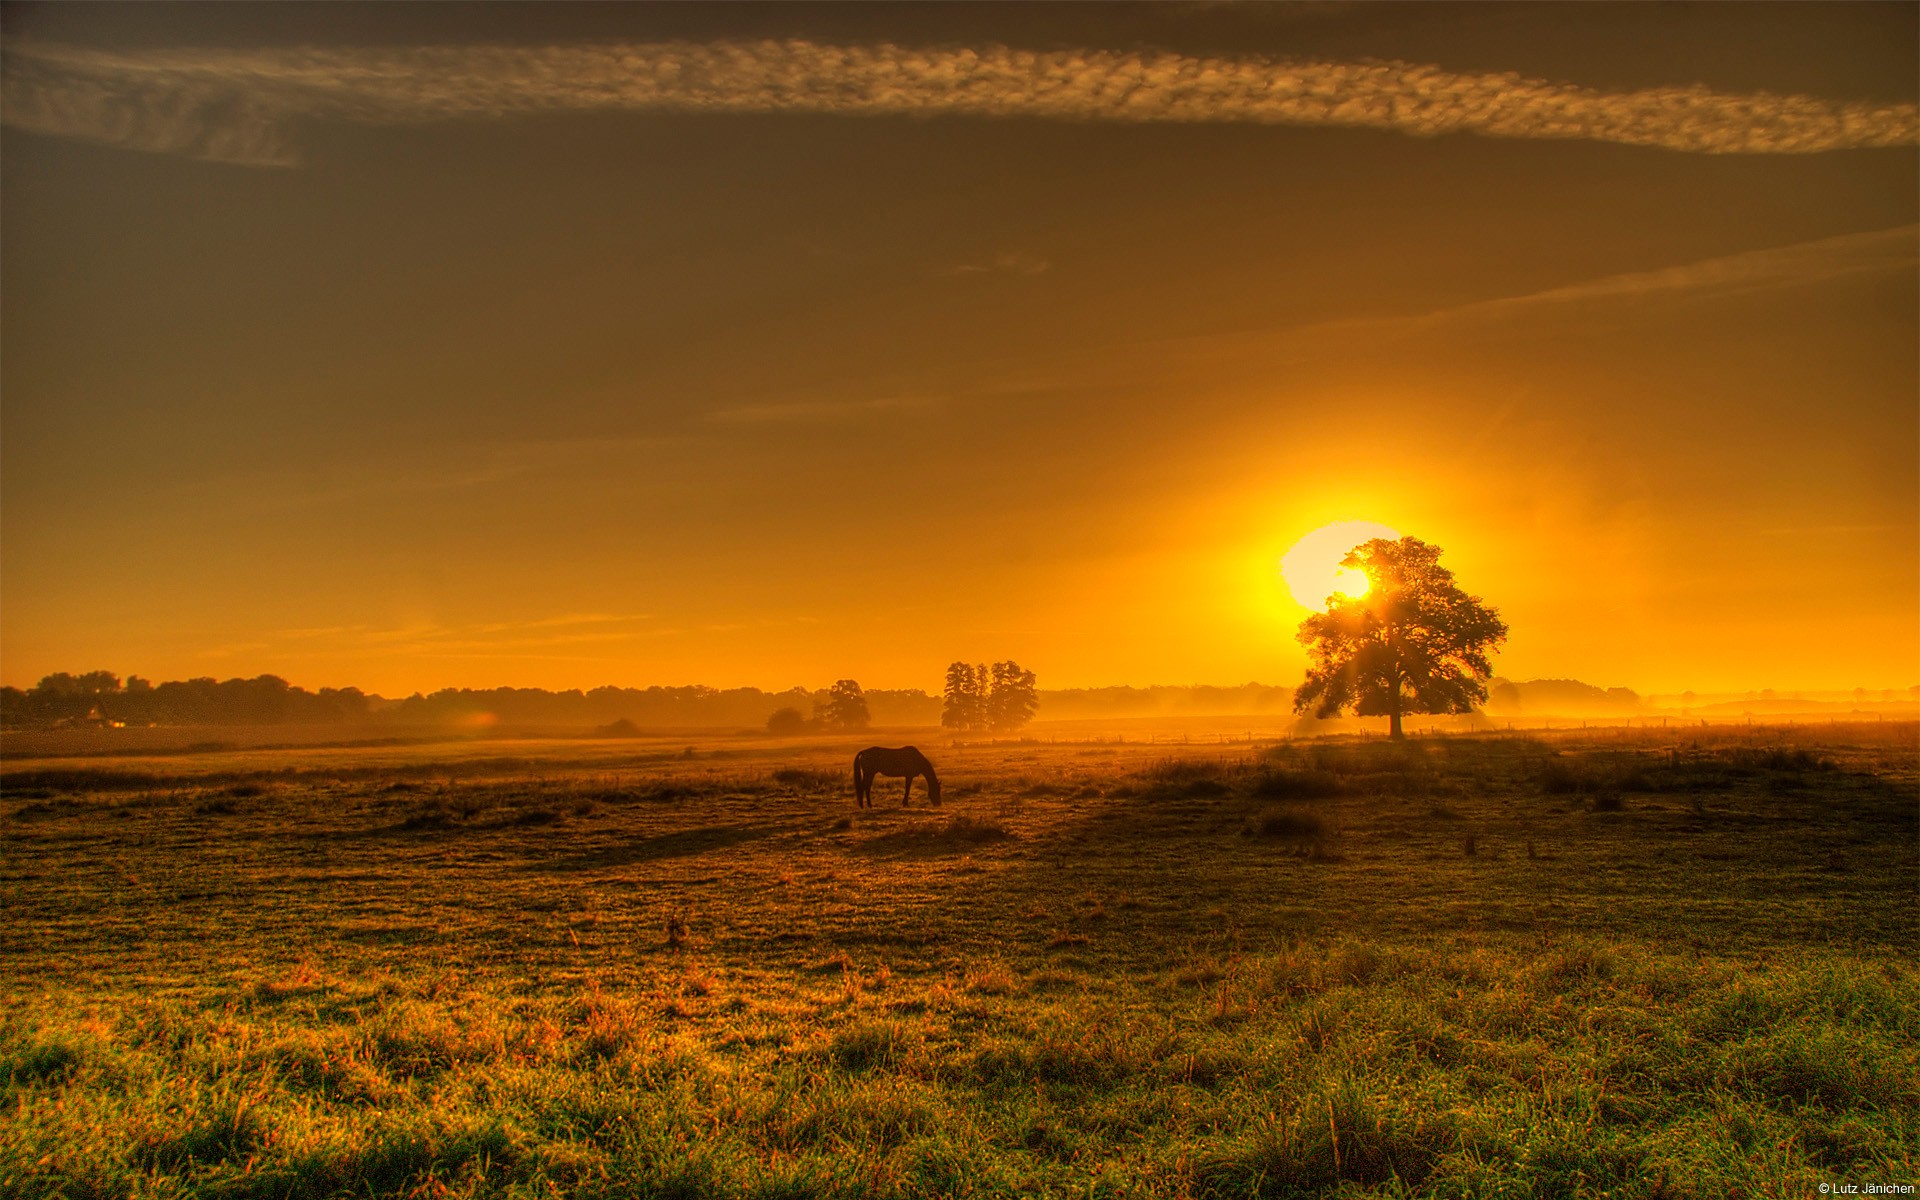 The Countryside wallpaper Sunset In The Countryside wallpapers HD free - 294838